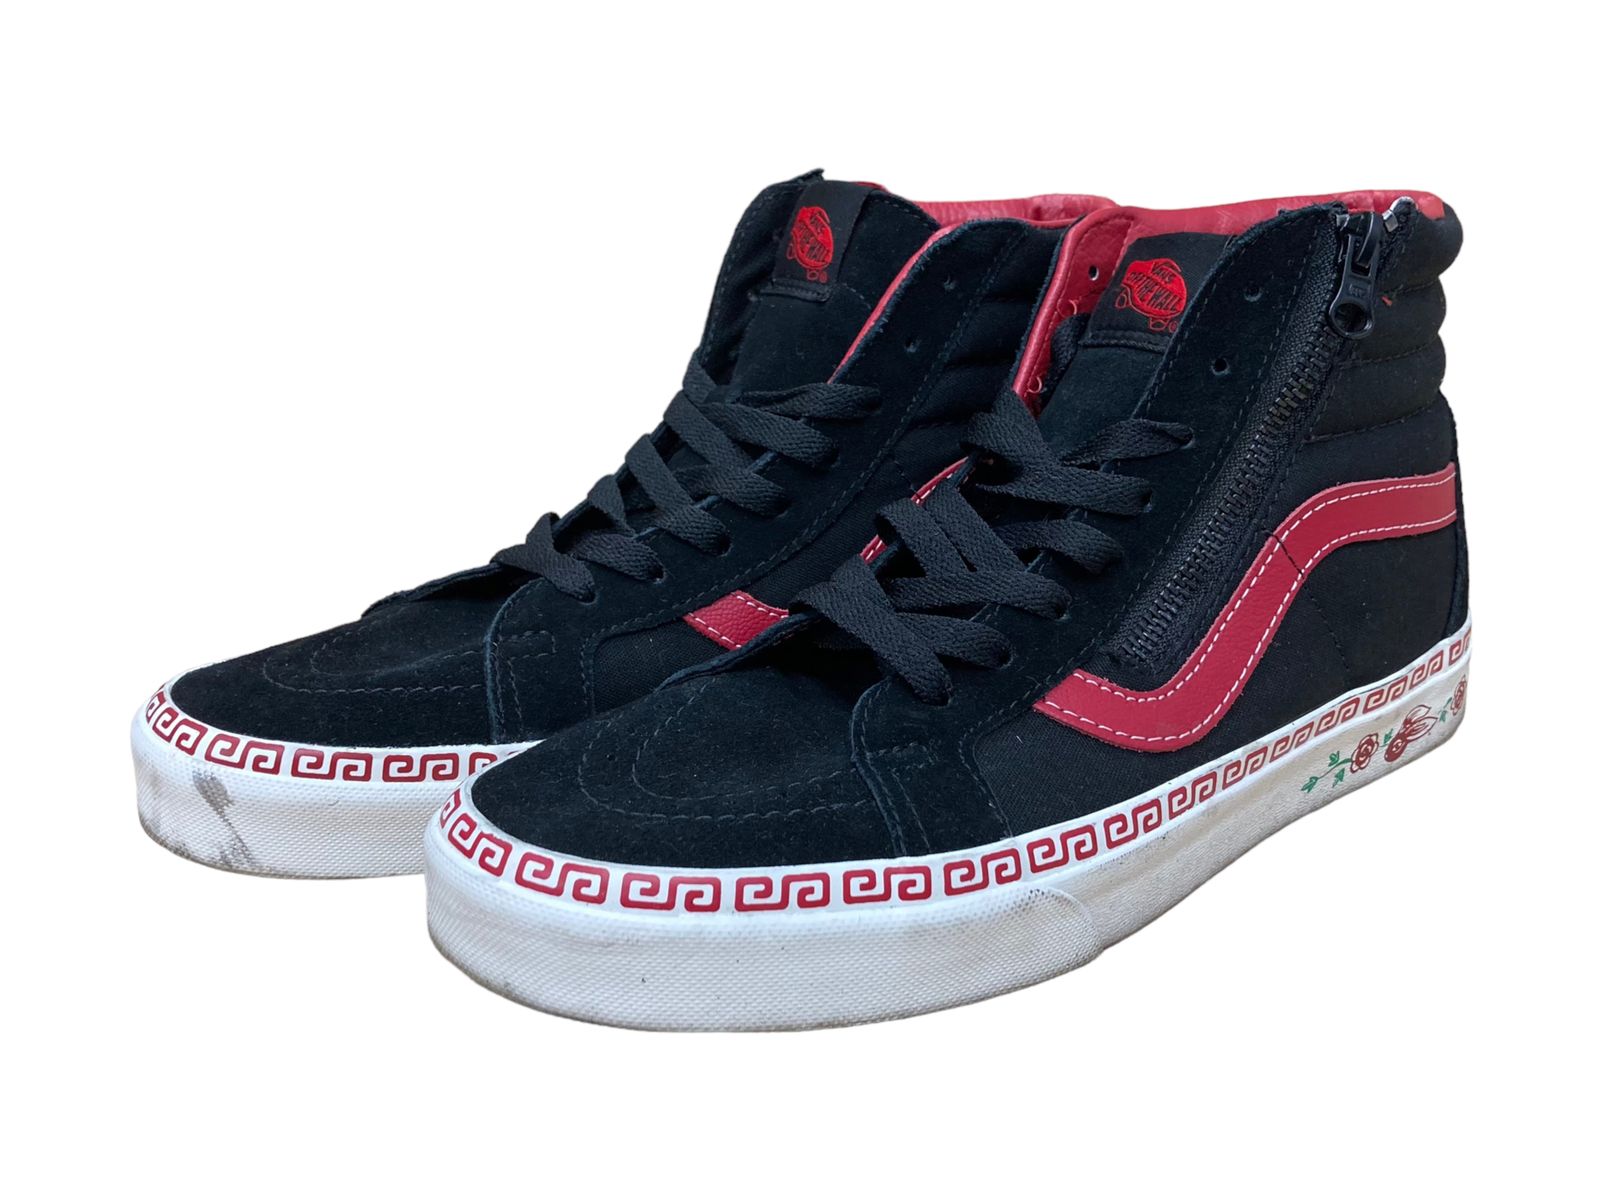 VANS (バンズ) YEAR OF THE RABBIT COLLECTION SK8-HI REISSUE SIDE